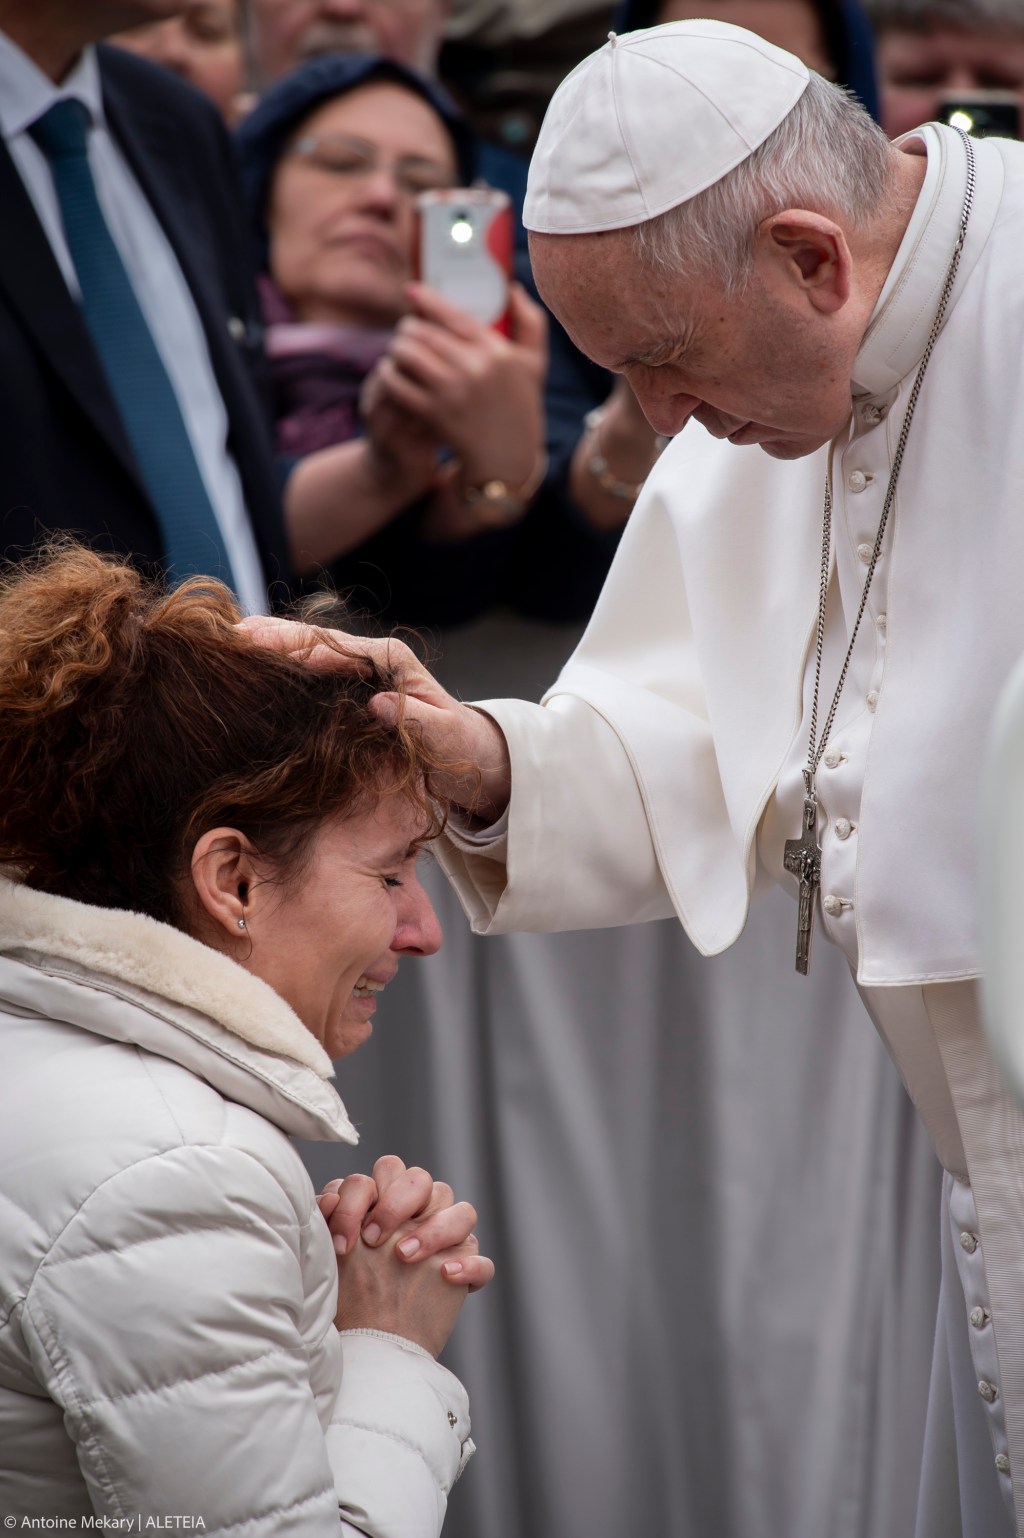 Pope Francis blesses a woman kneeling before him at the end of the weekly general audience